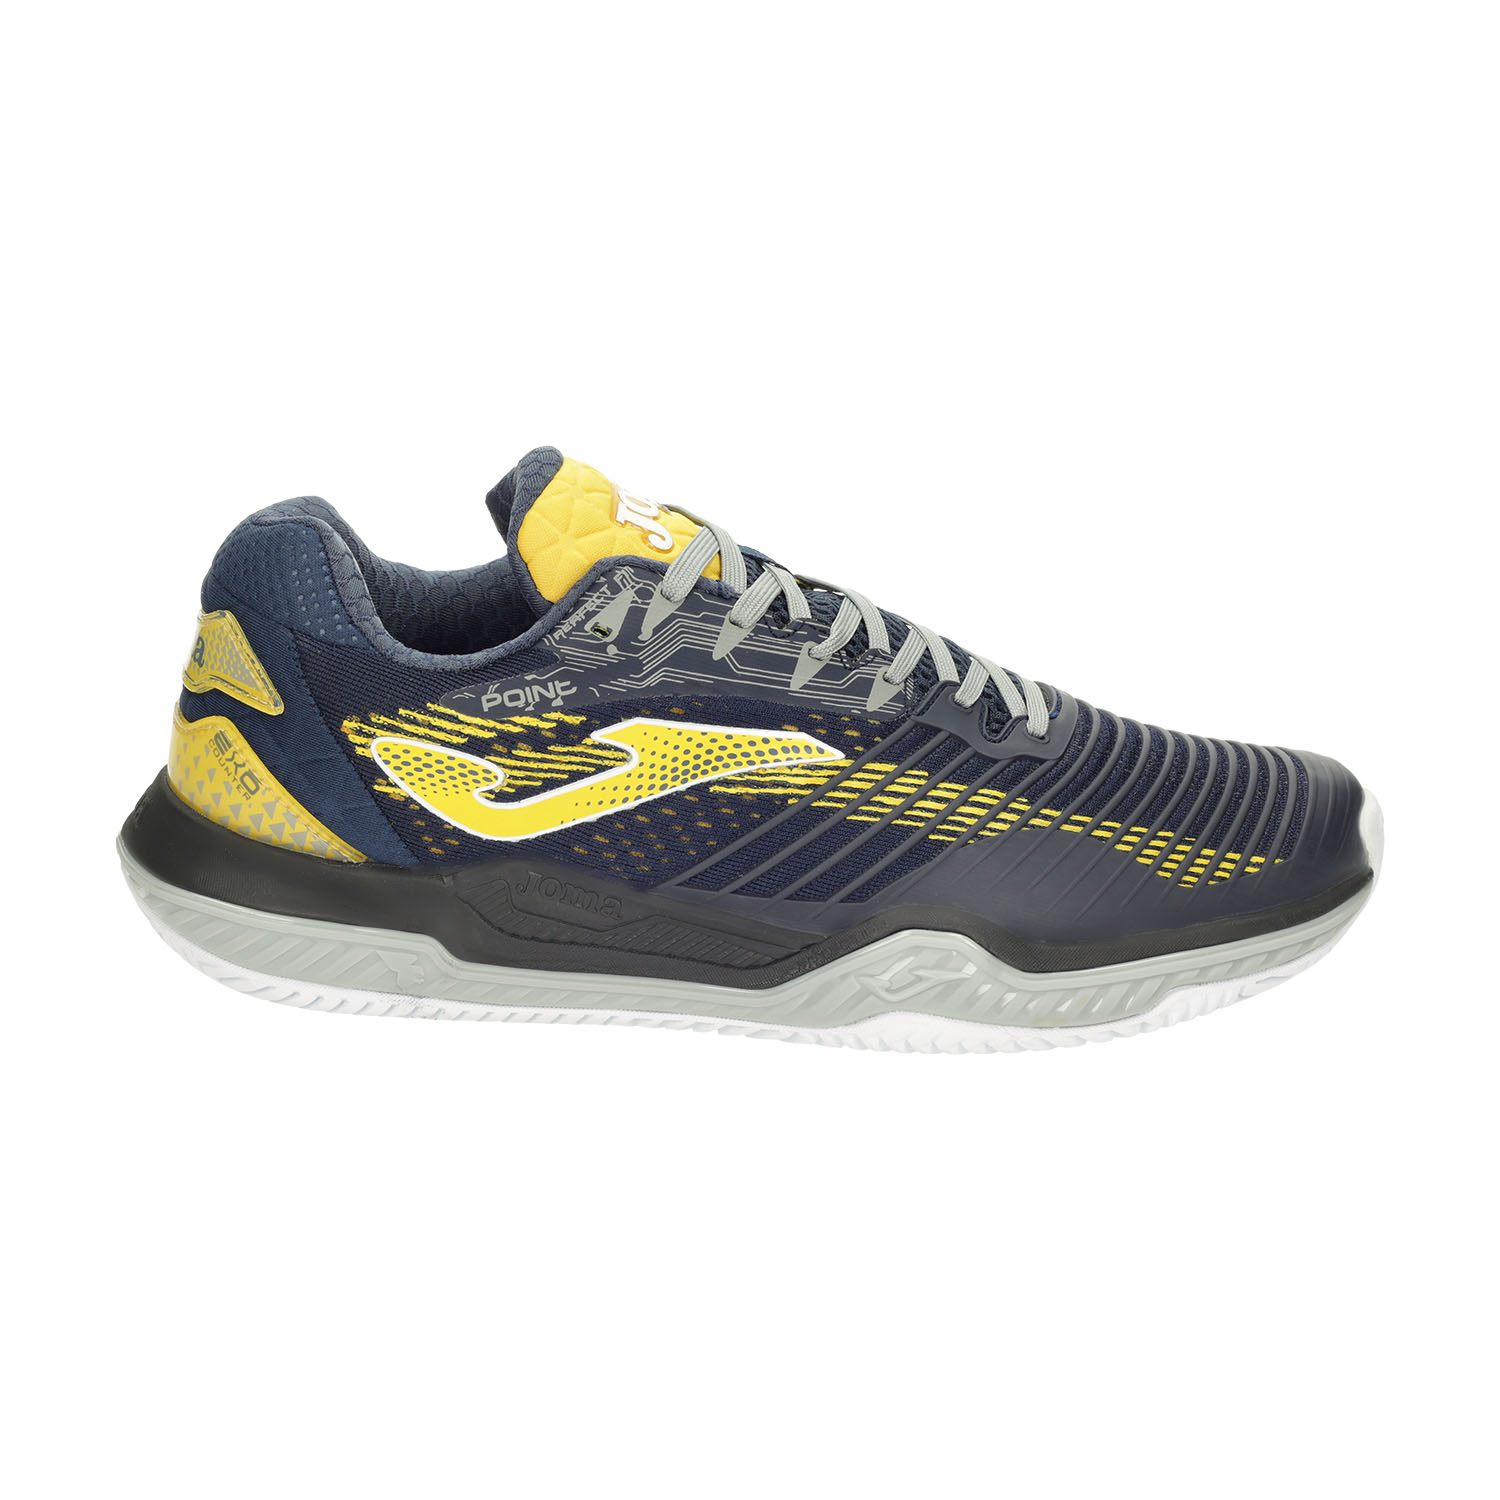 Joma Point Men's Tennis Shoes - Navy/Gold